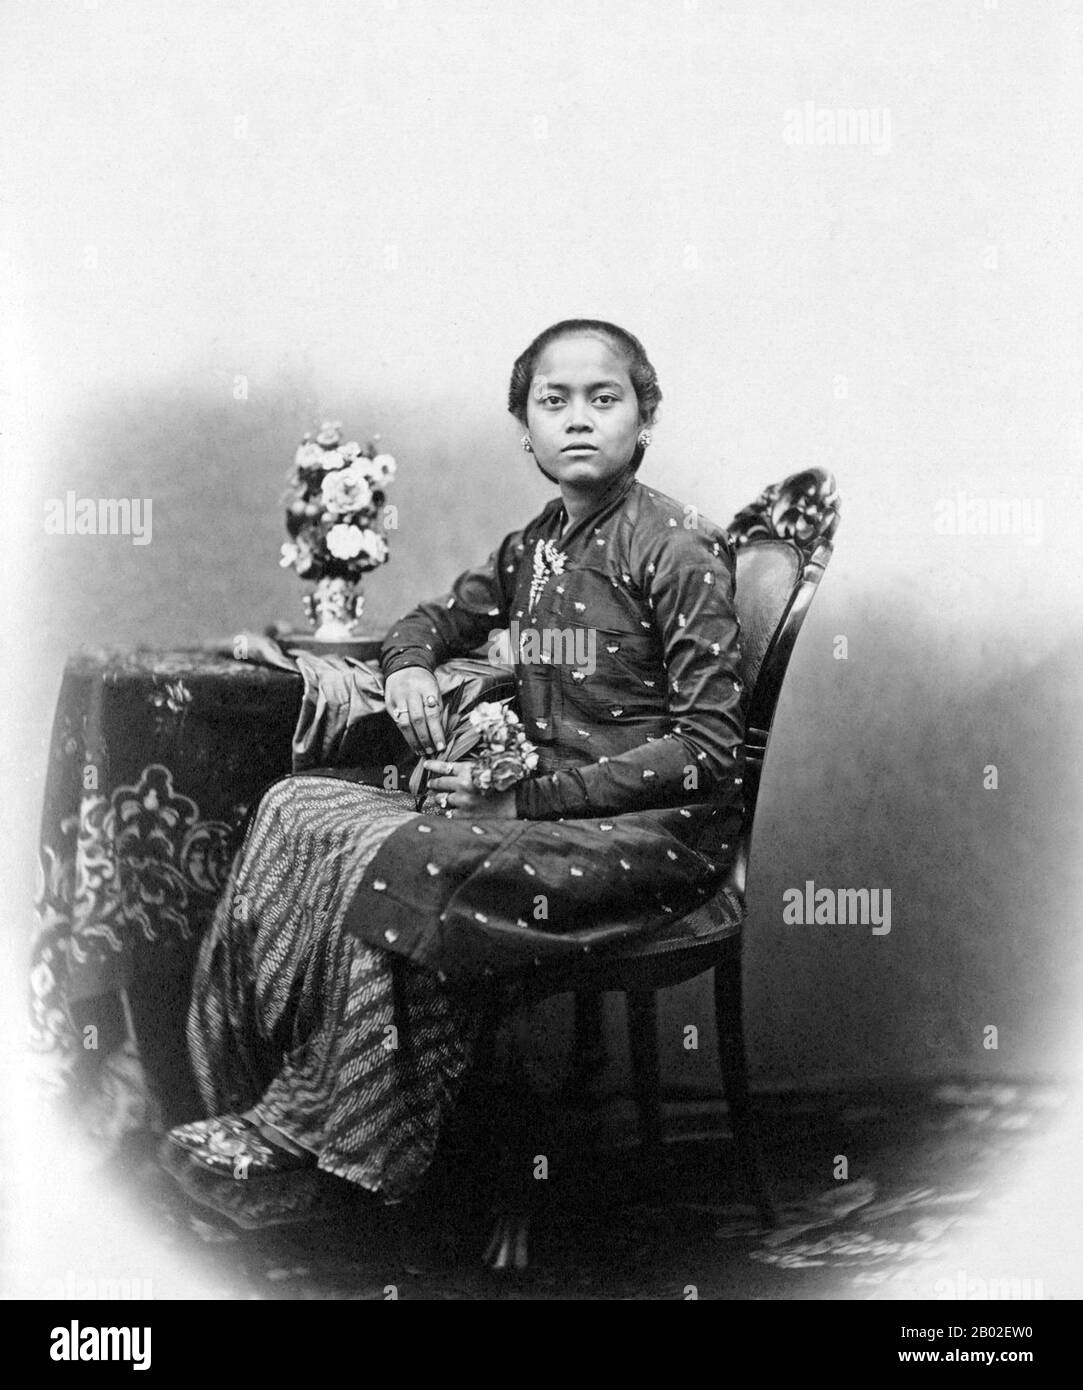 Kassian Cephas (15 January 1845 – 16 November 1912) was a Javanese photographer of the court of the Yogyakarta Sultanate. He was the first indigenous person from Indonesia to become a professional photographer and was trained at the request of Sultan Hamengkubuwana VI (r. 1855–1877).  After becoming a court photographer in early 1871, he began working on portrait photography for members of the royal family, as well as documentary work for the Dutch Archaeological Union (Archaeologische Vereeniging). Cephas was recognized for his contributions to preserving Java's cultural heritage through memb Stock Photo